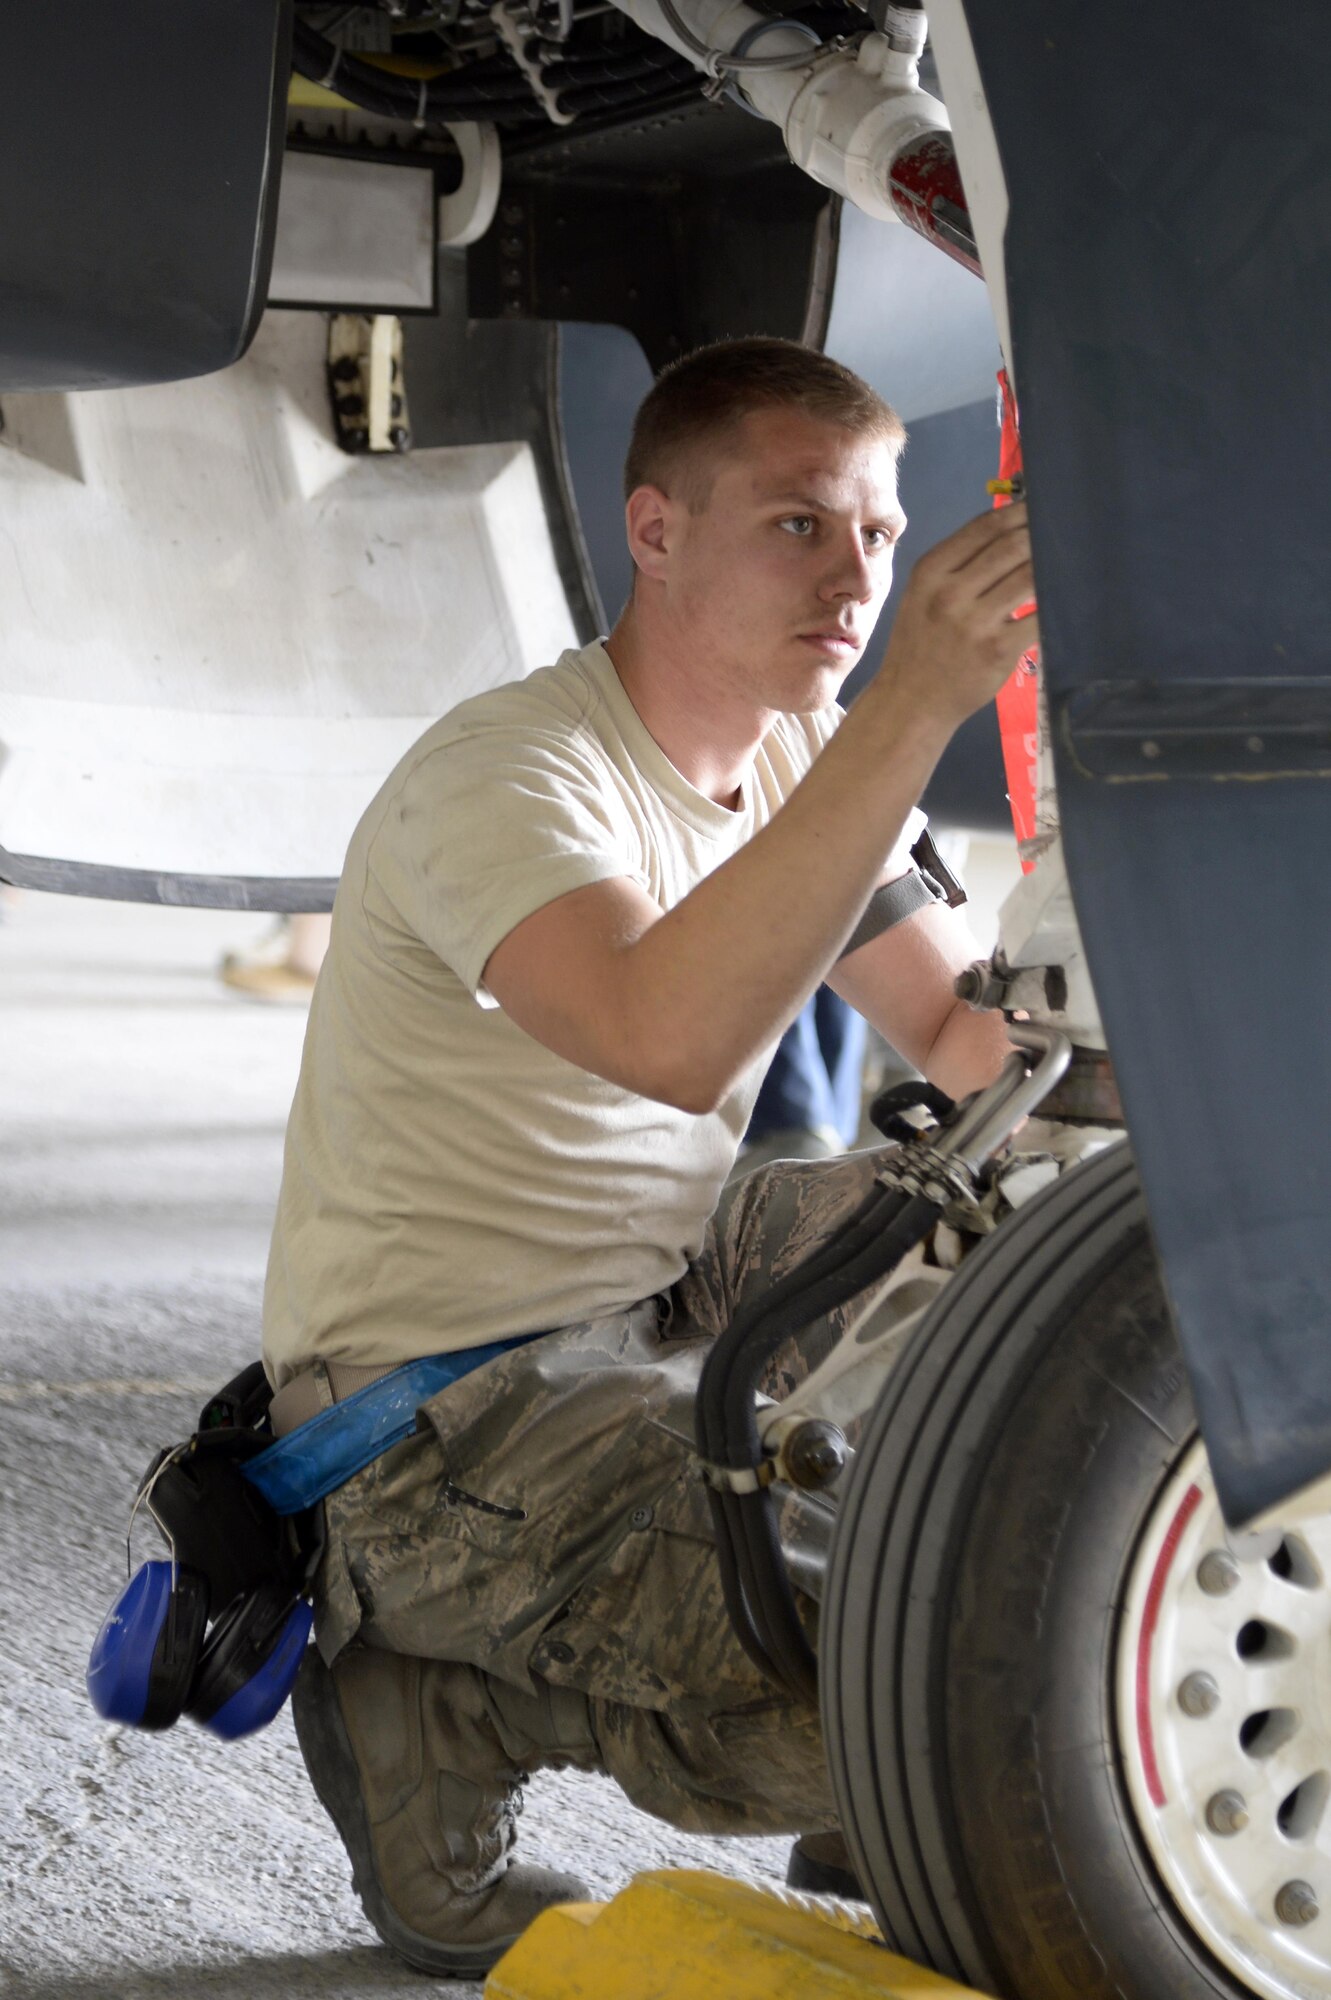 Airman 1st Class Anthony, crew chief, checks the RQ-4 Global Hawk landing gear strut for cracks during a post flight inspection at an undisclosed location in Southwest Asia Mar. 8, 2015. Hawk Aircraft Maintenance Unit Airmen provide combat ready safe and reliable aircraft for the warfighter. Anthony is currently deployed from Grand Forks Air Force Base, N.D. (U.S. Air Force photo/Tech. Sgt. Marie Brown)